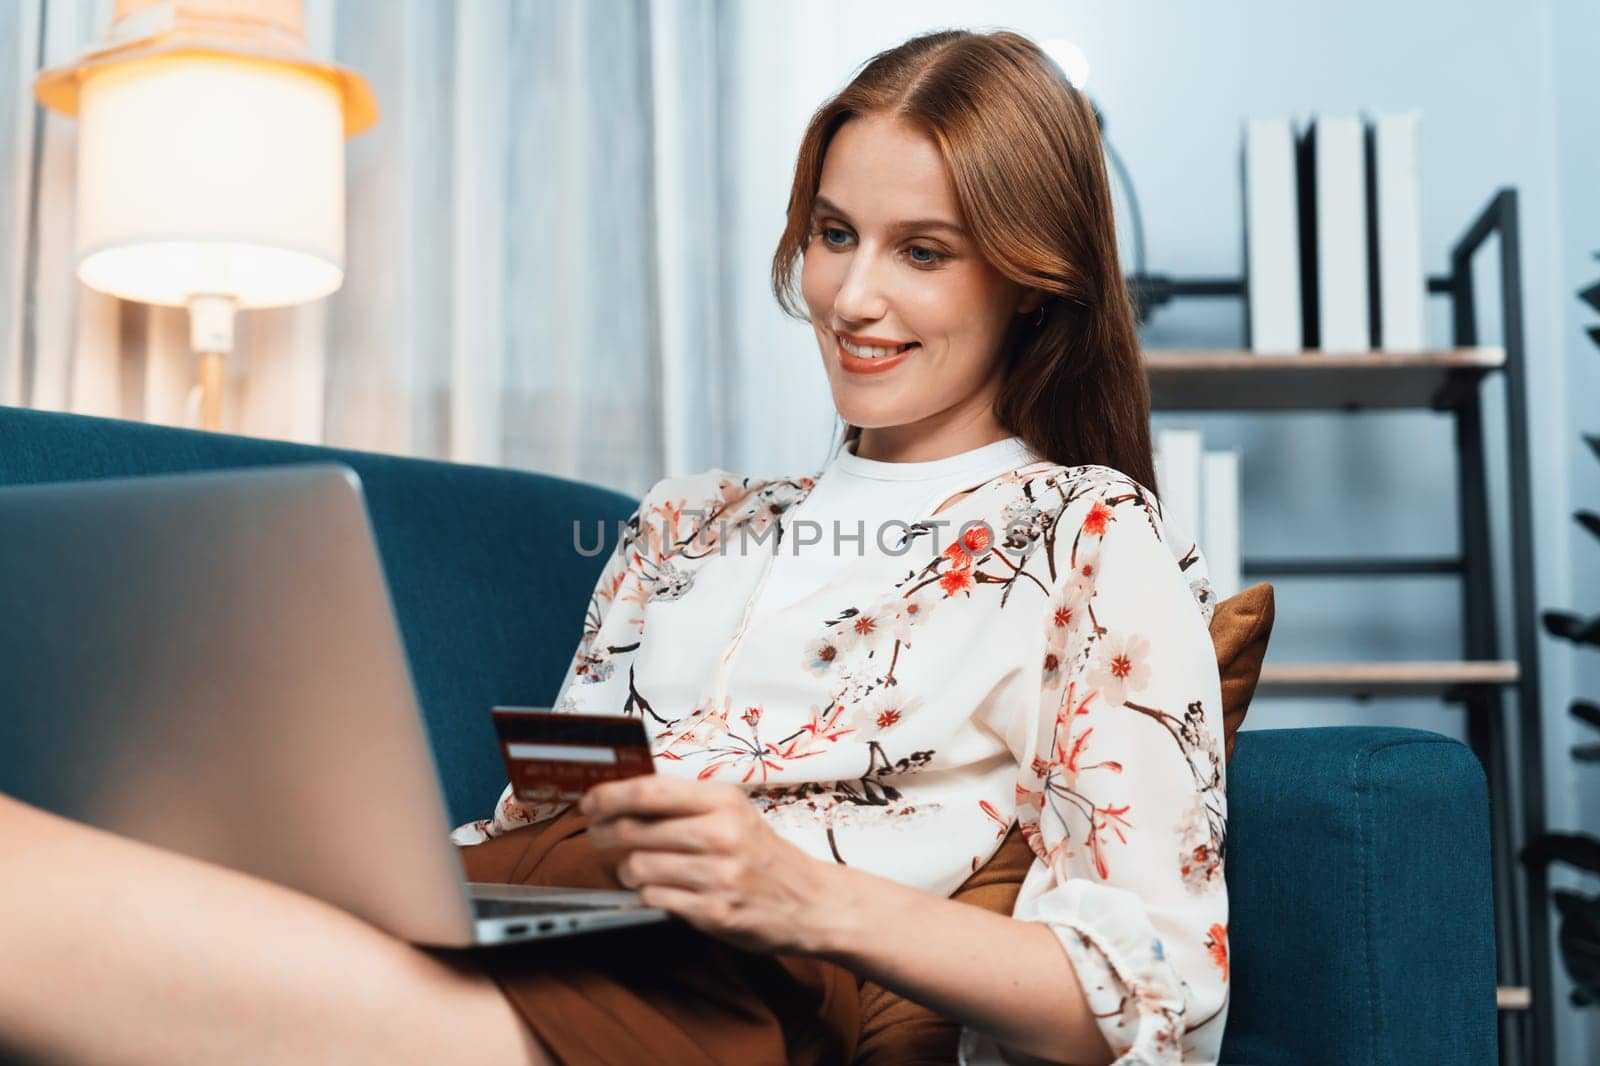 Young happy woman buy product by online shopping at home while ordering items from the internet with credit card online payment system protected by utmost cyber security from online store platform